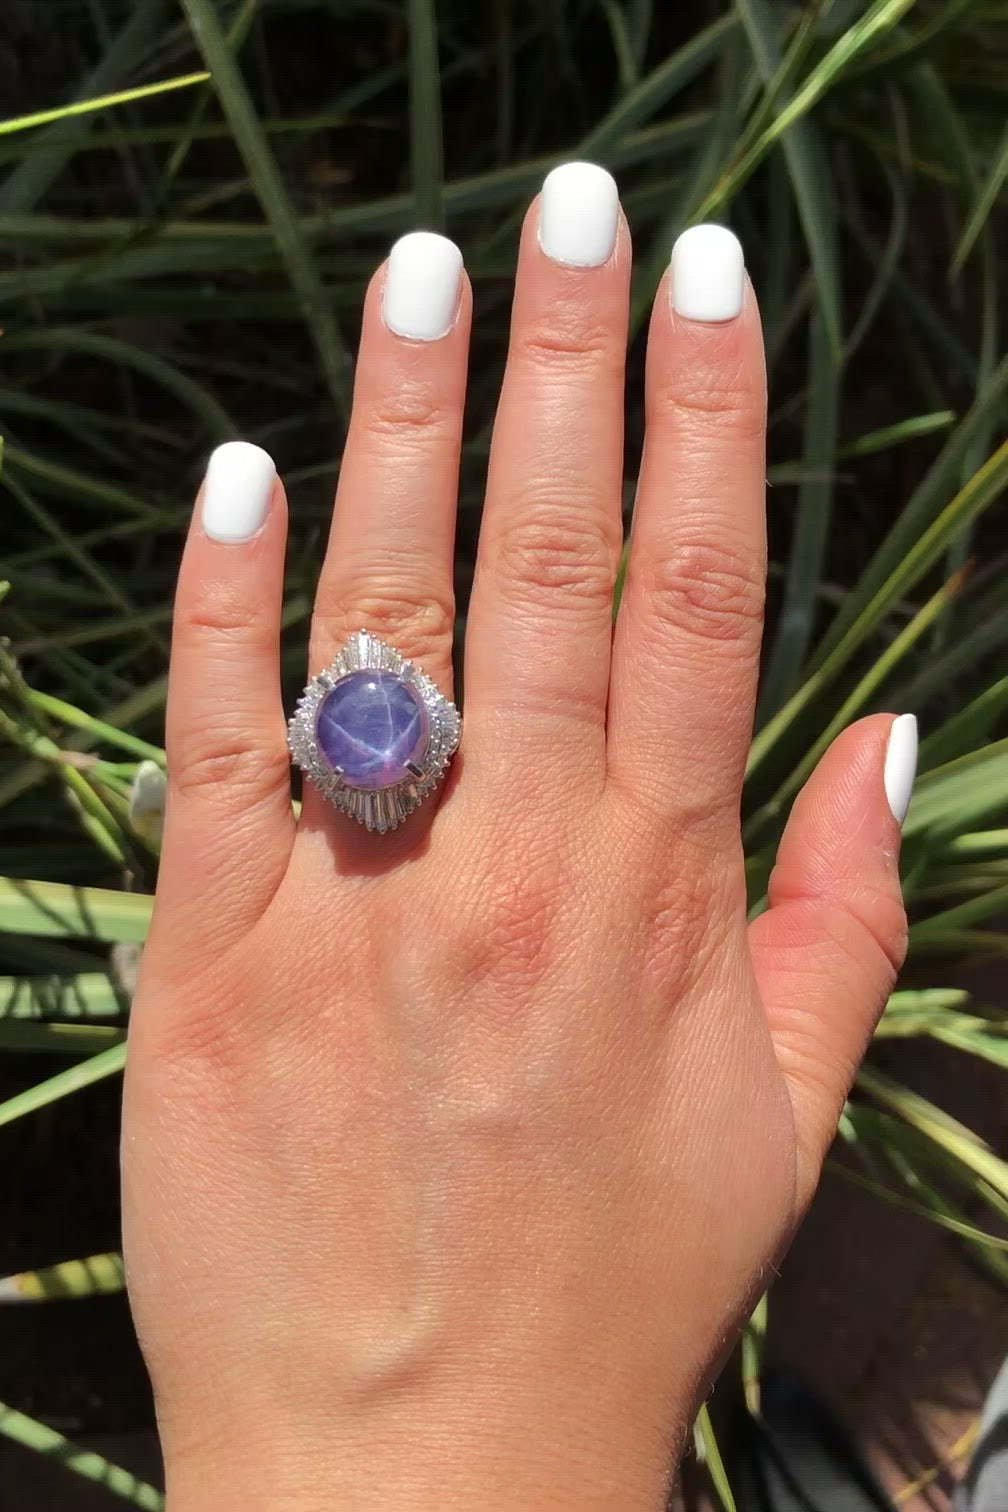 A medium purple star sapphire dome target ring accented by diamonds.